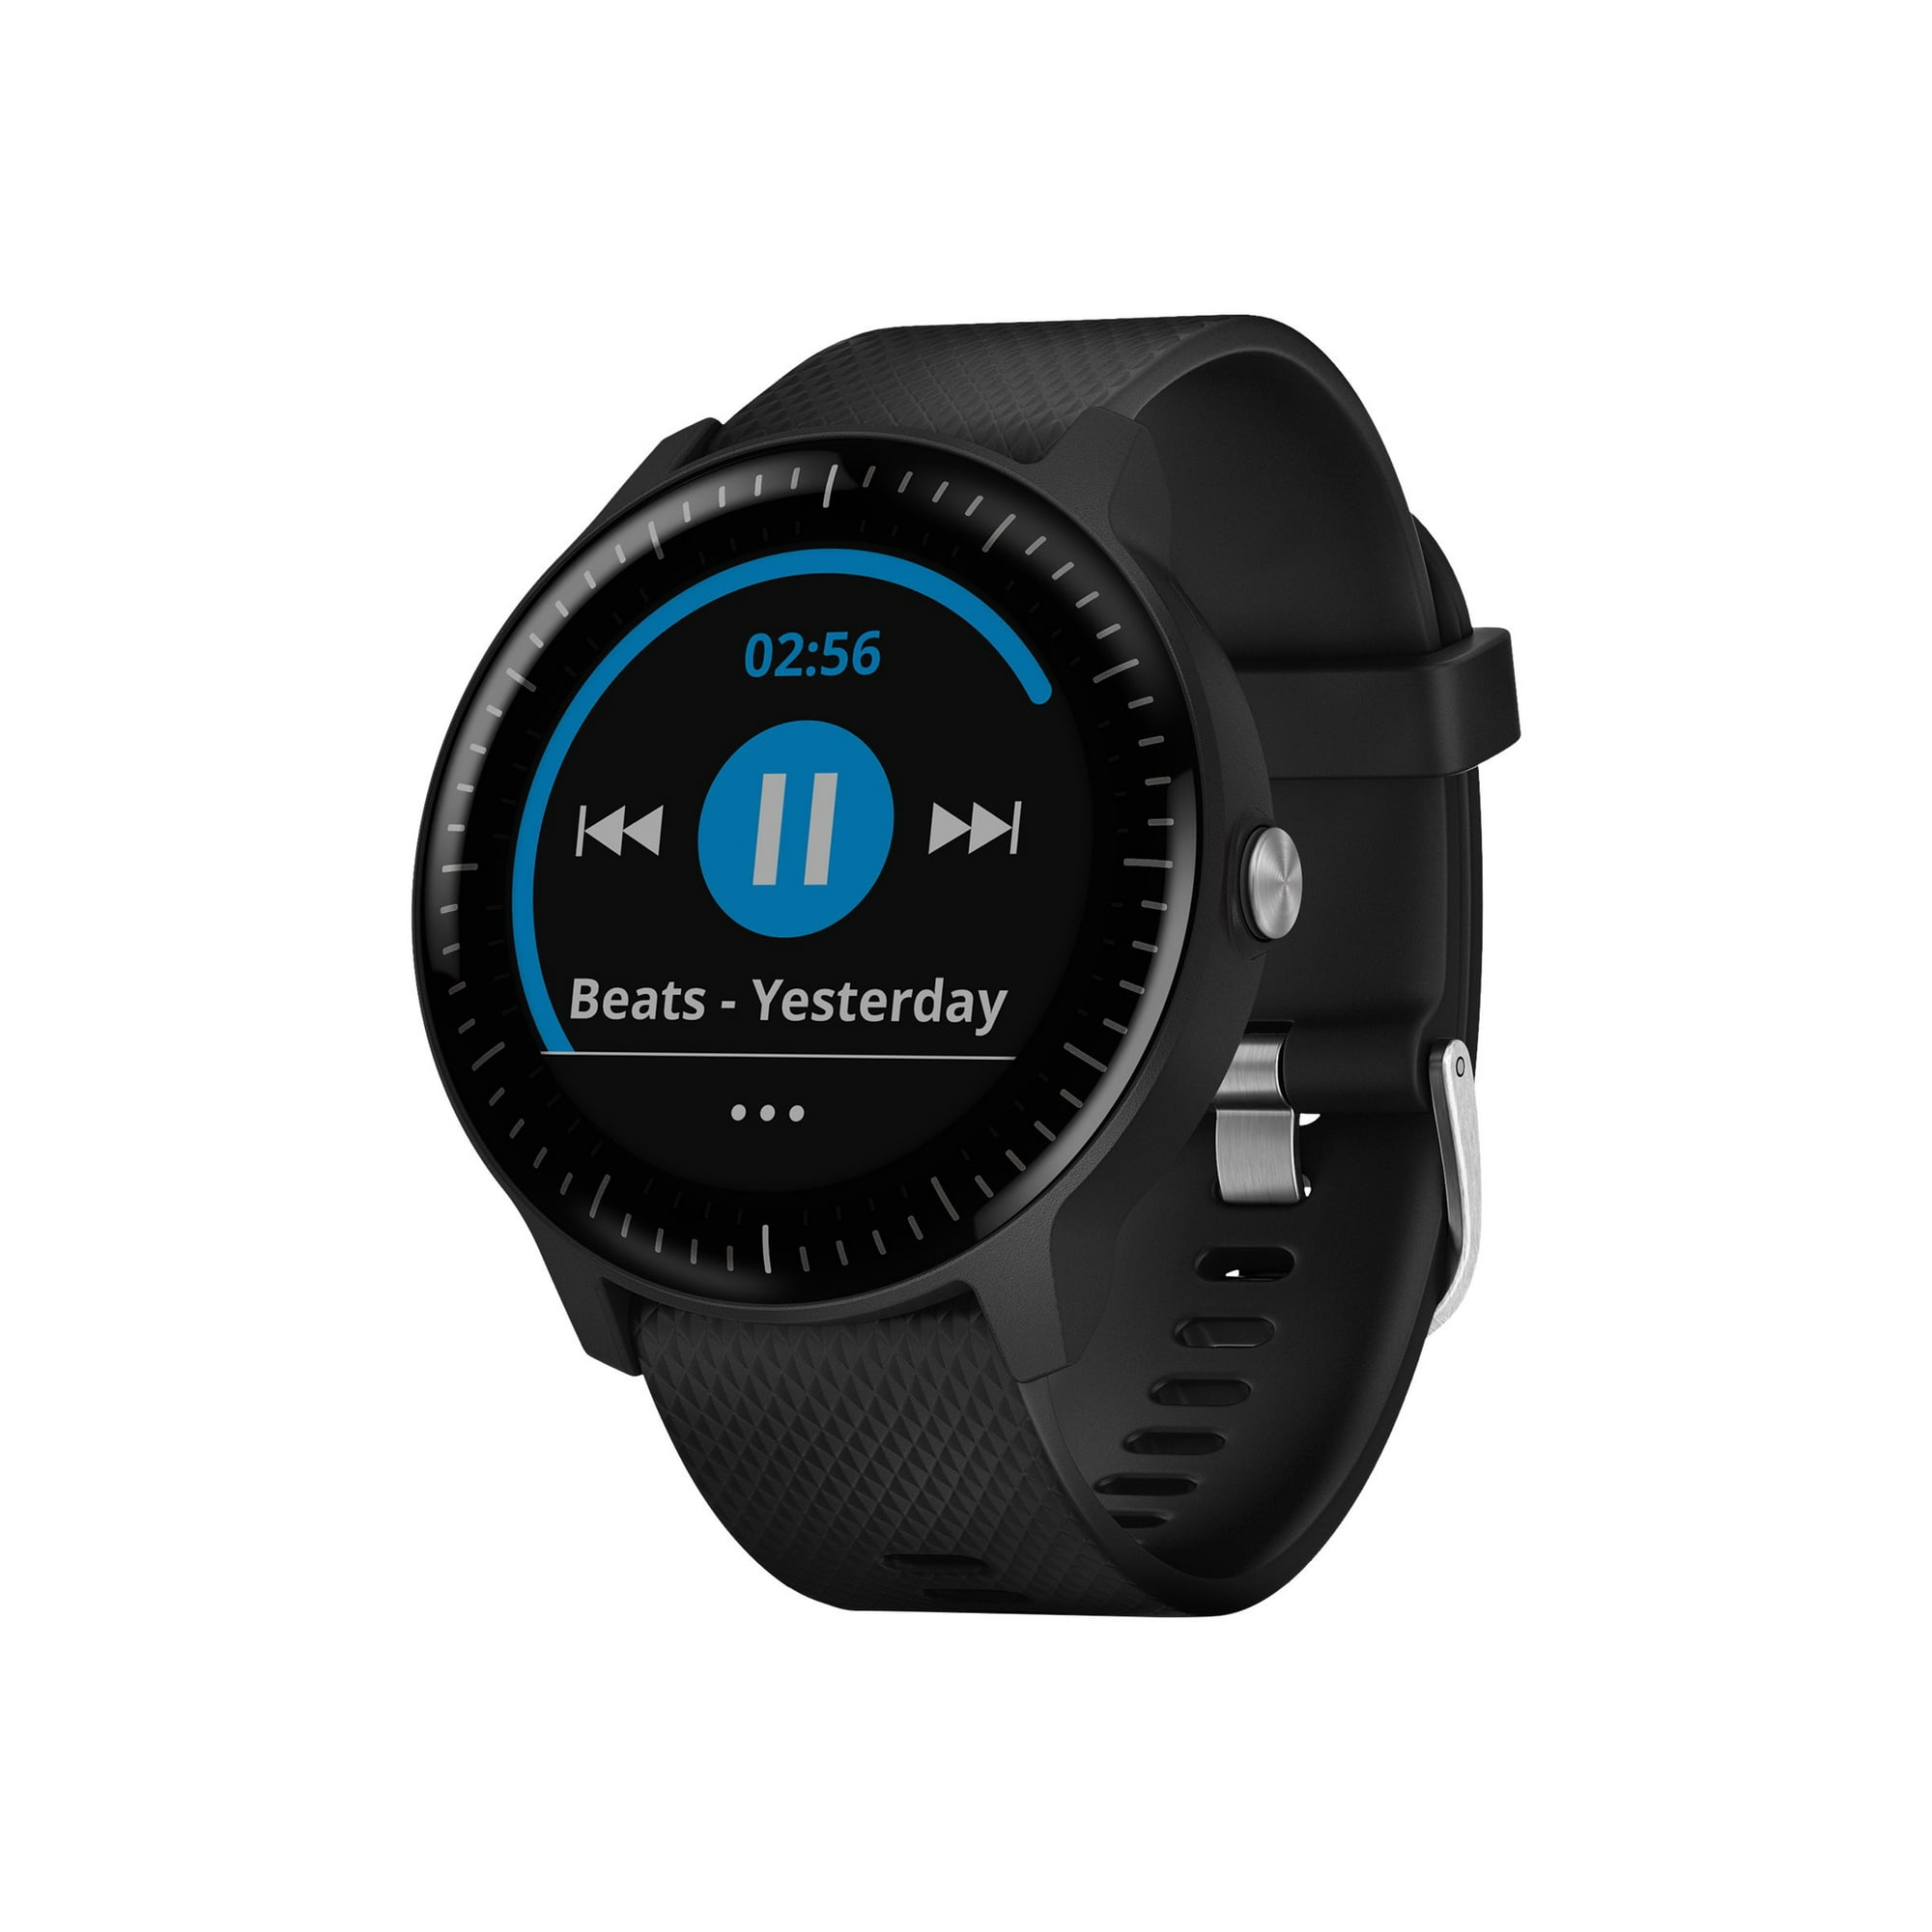 Garmin v������voactive 3 Music - Black - smart watch with band - silicone - black - wrist size: 5 in - 8.03 in - display 1.2" ANT+/ANT - 1.52 oz | Walmart Canada